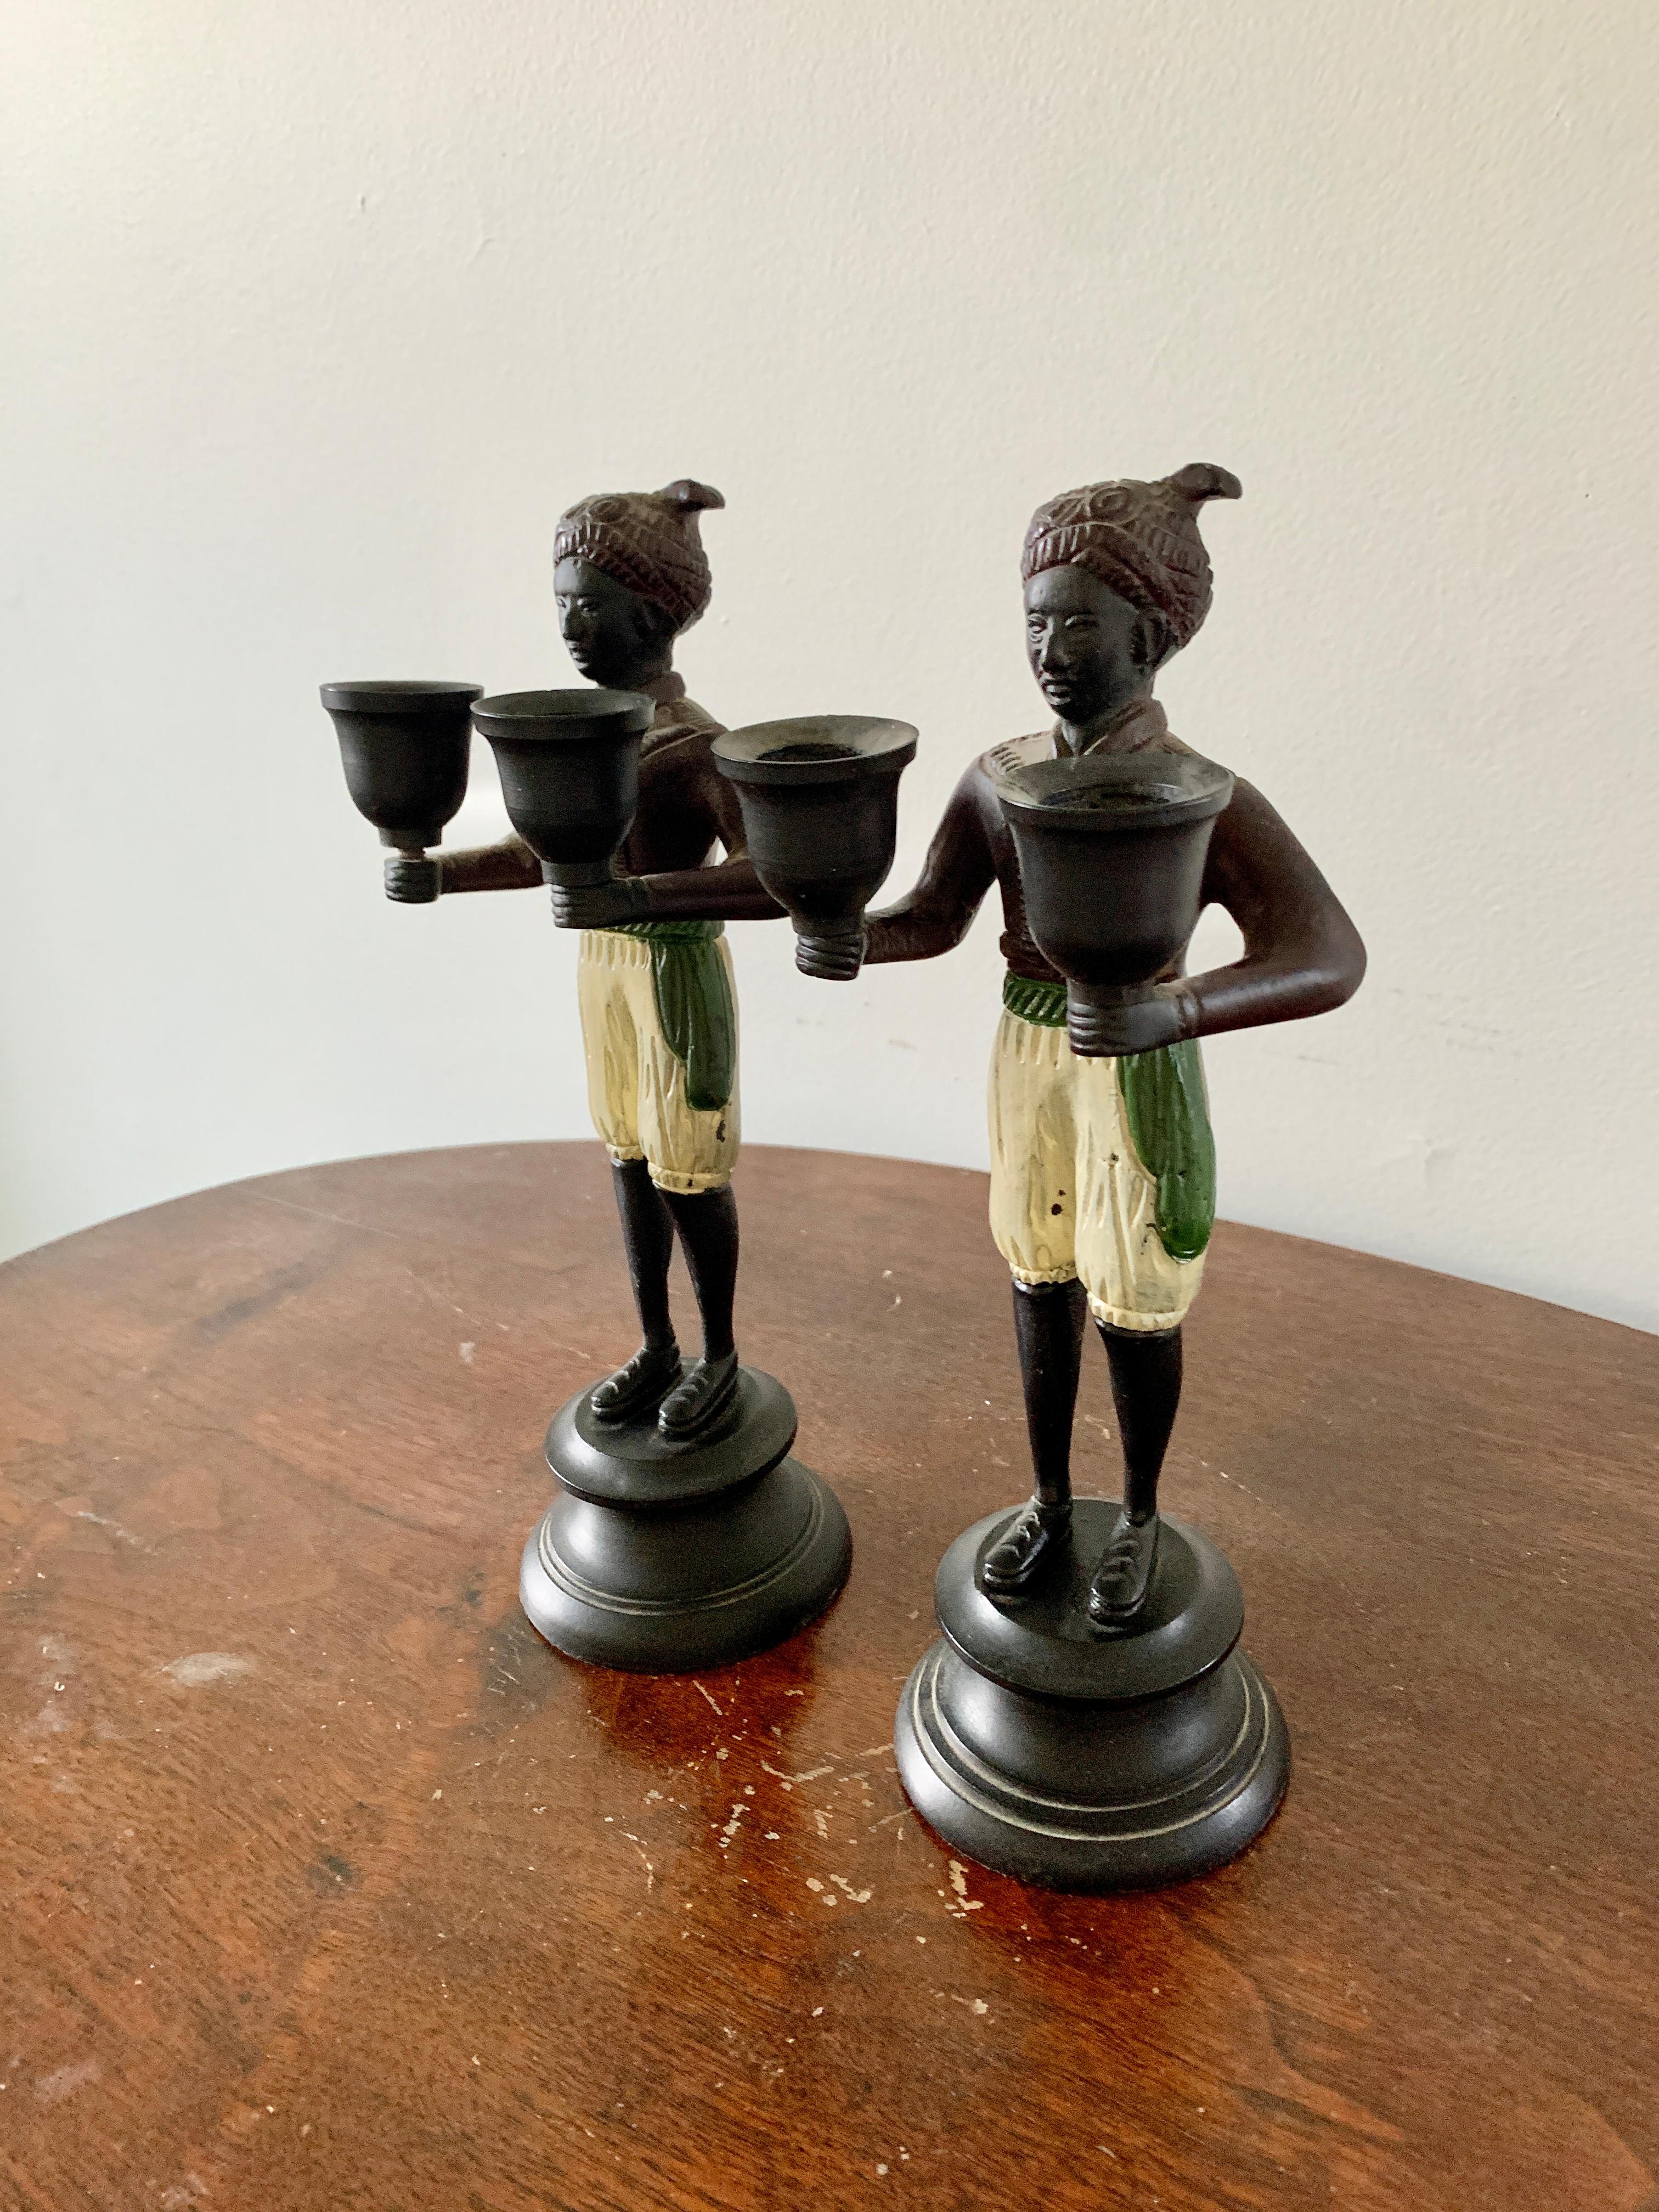 A beautiful pair of cast bronze figurative statues of men carrying two candle cups

USA, Late-20th Century 

Measures: 4